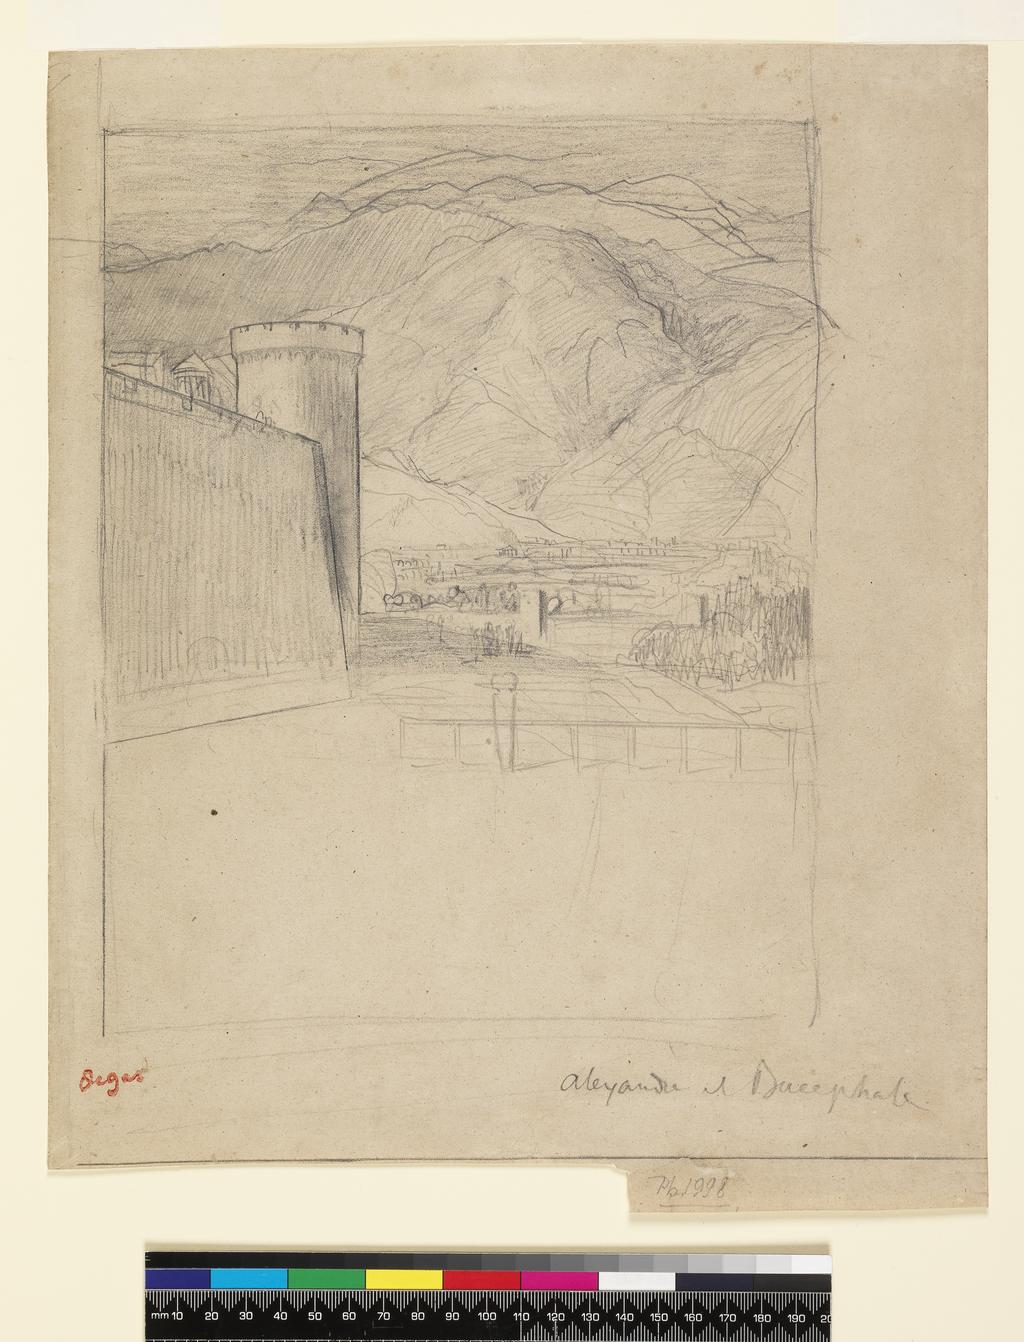 An image of Study for the landscape background of Alexander and Bucephalus. Degas, Edgar (French, 1834-1917). Graphite on paper, height 340 mm, width 274 mm.